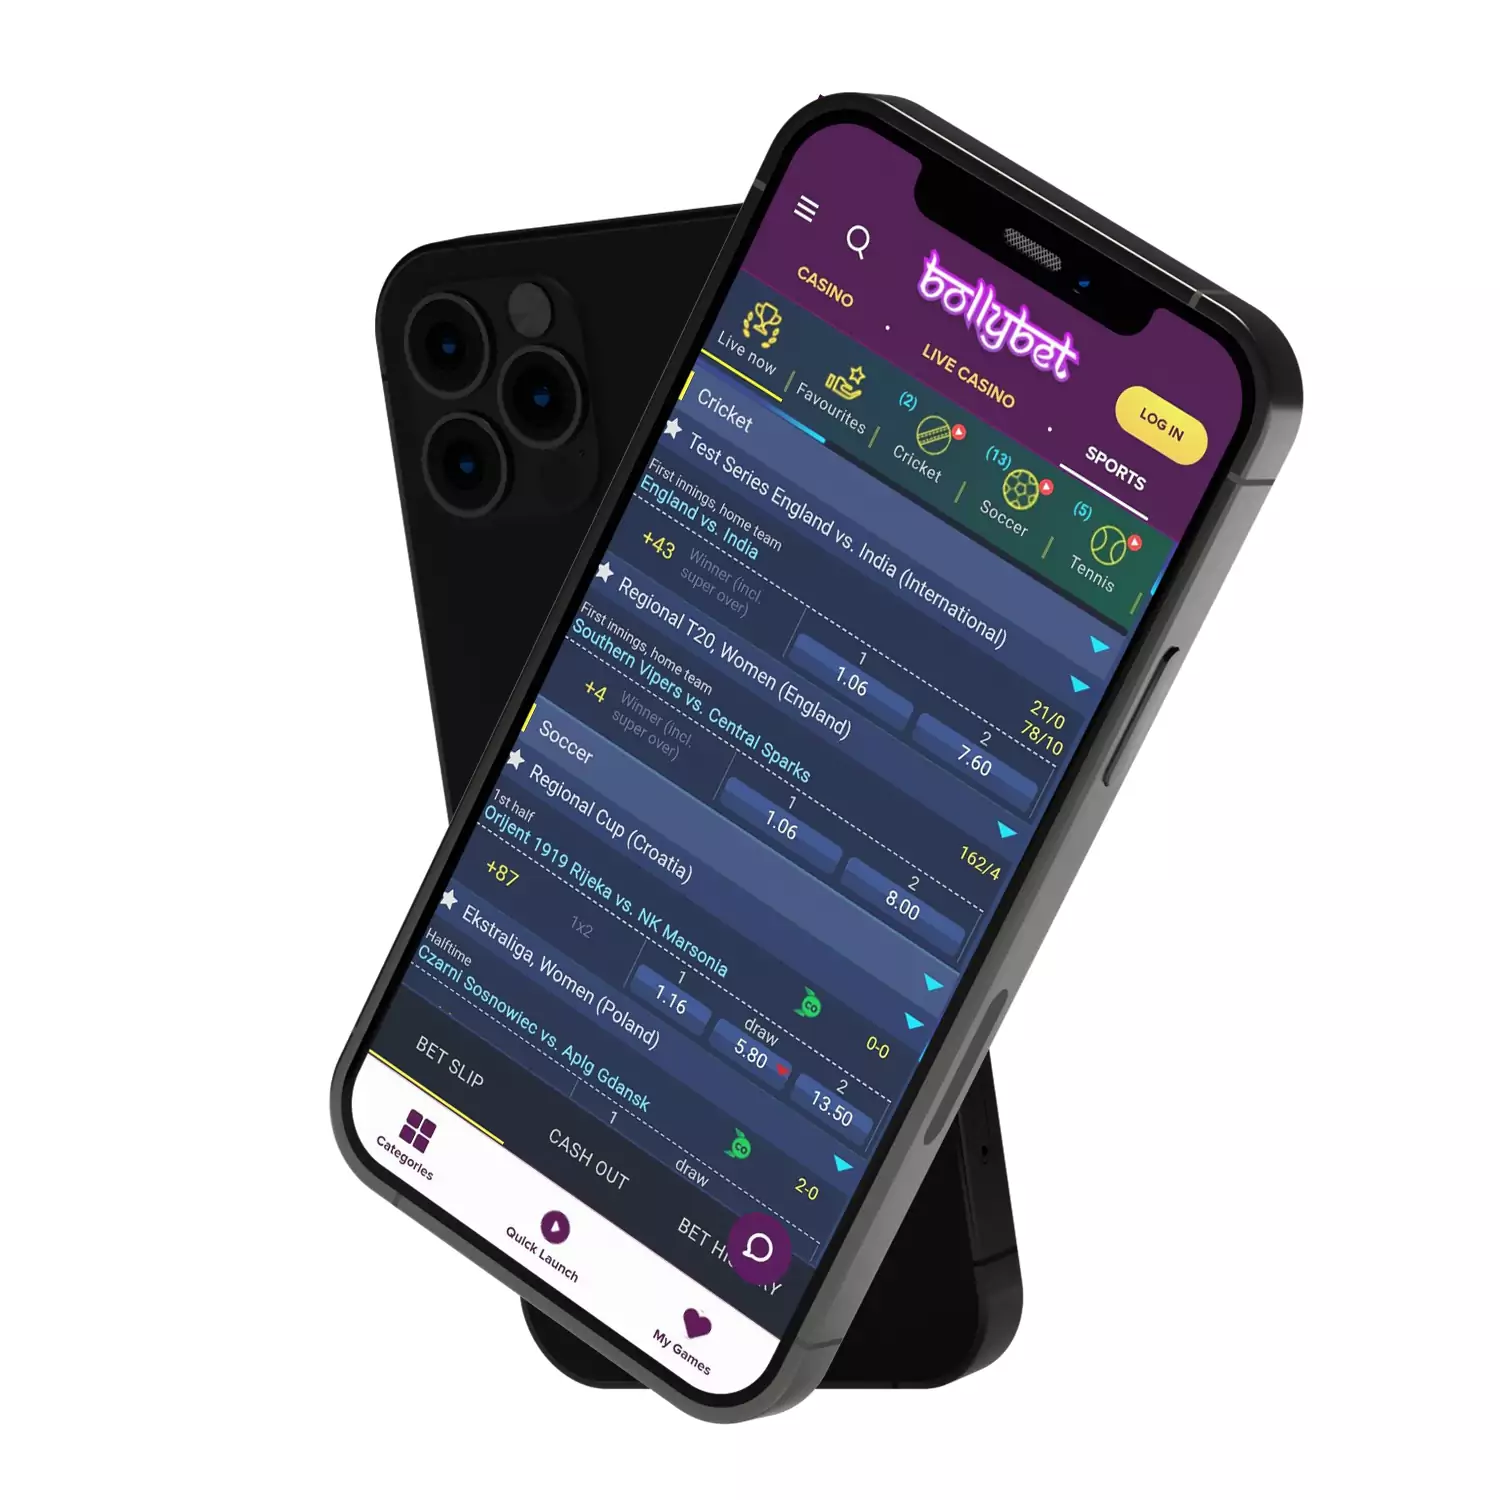 Bollybet app includes all the functionality of the official website.